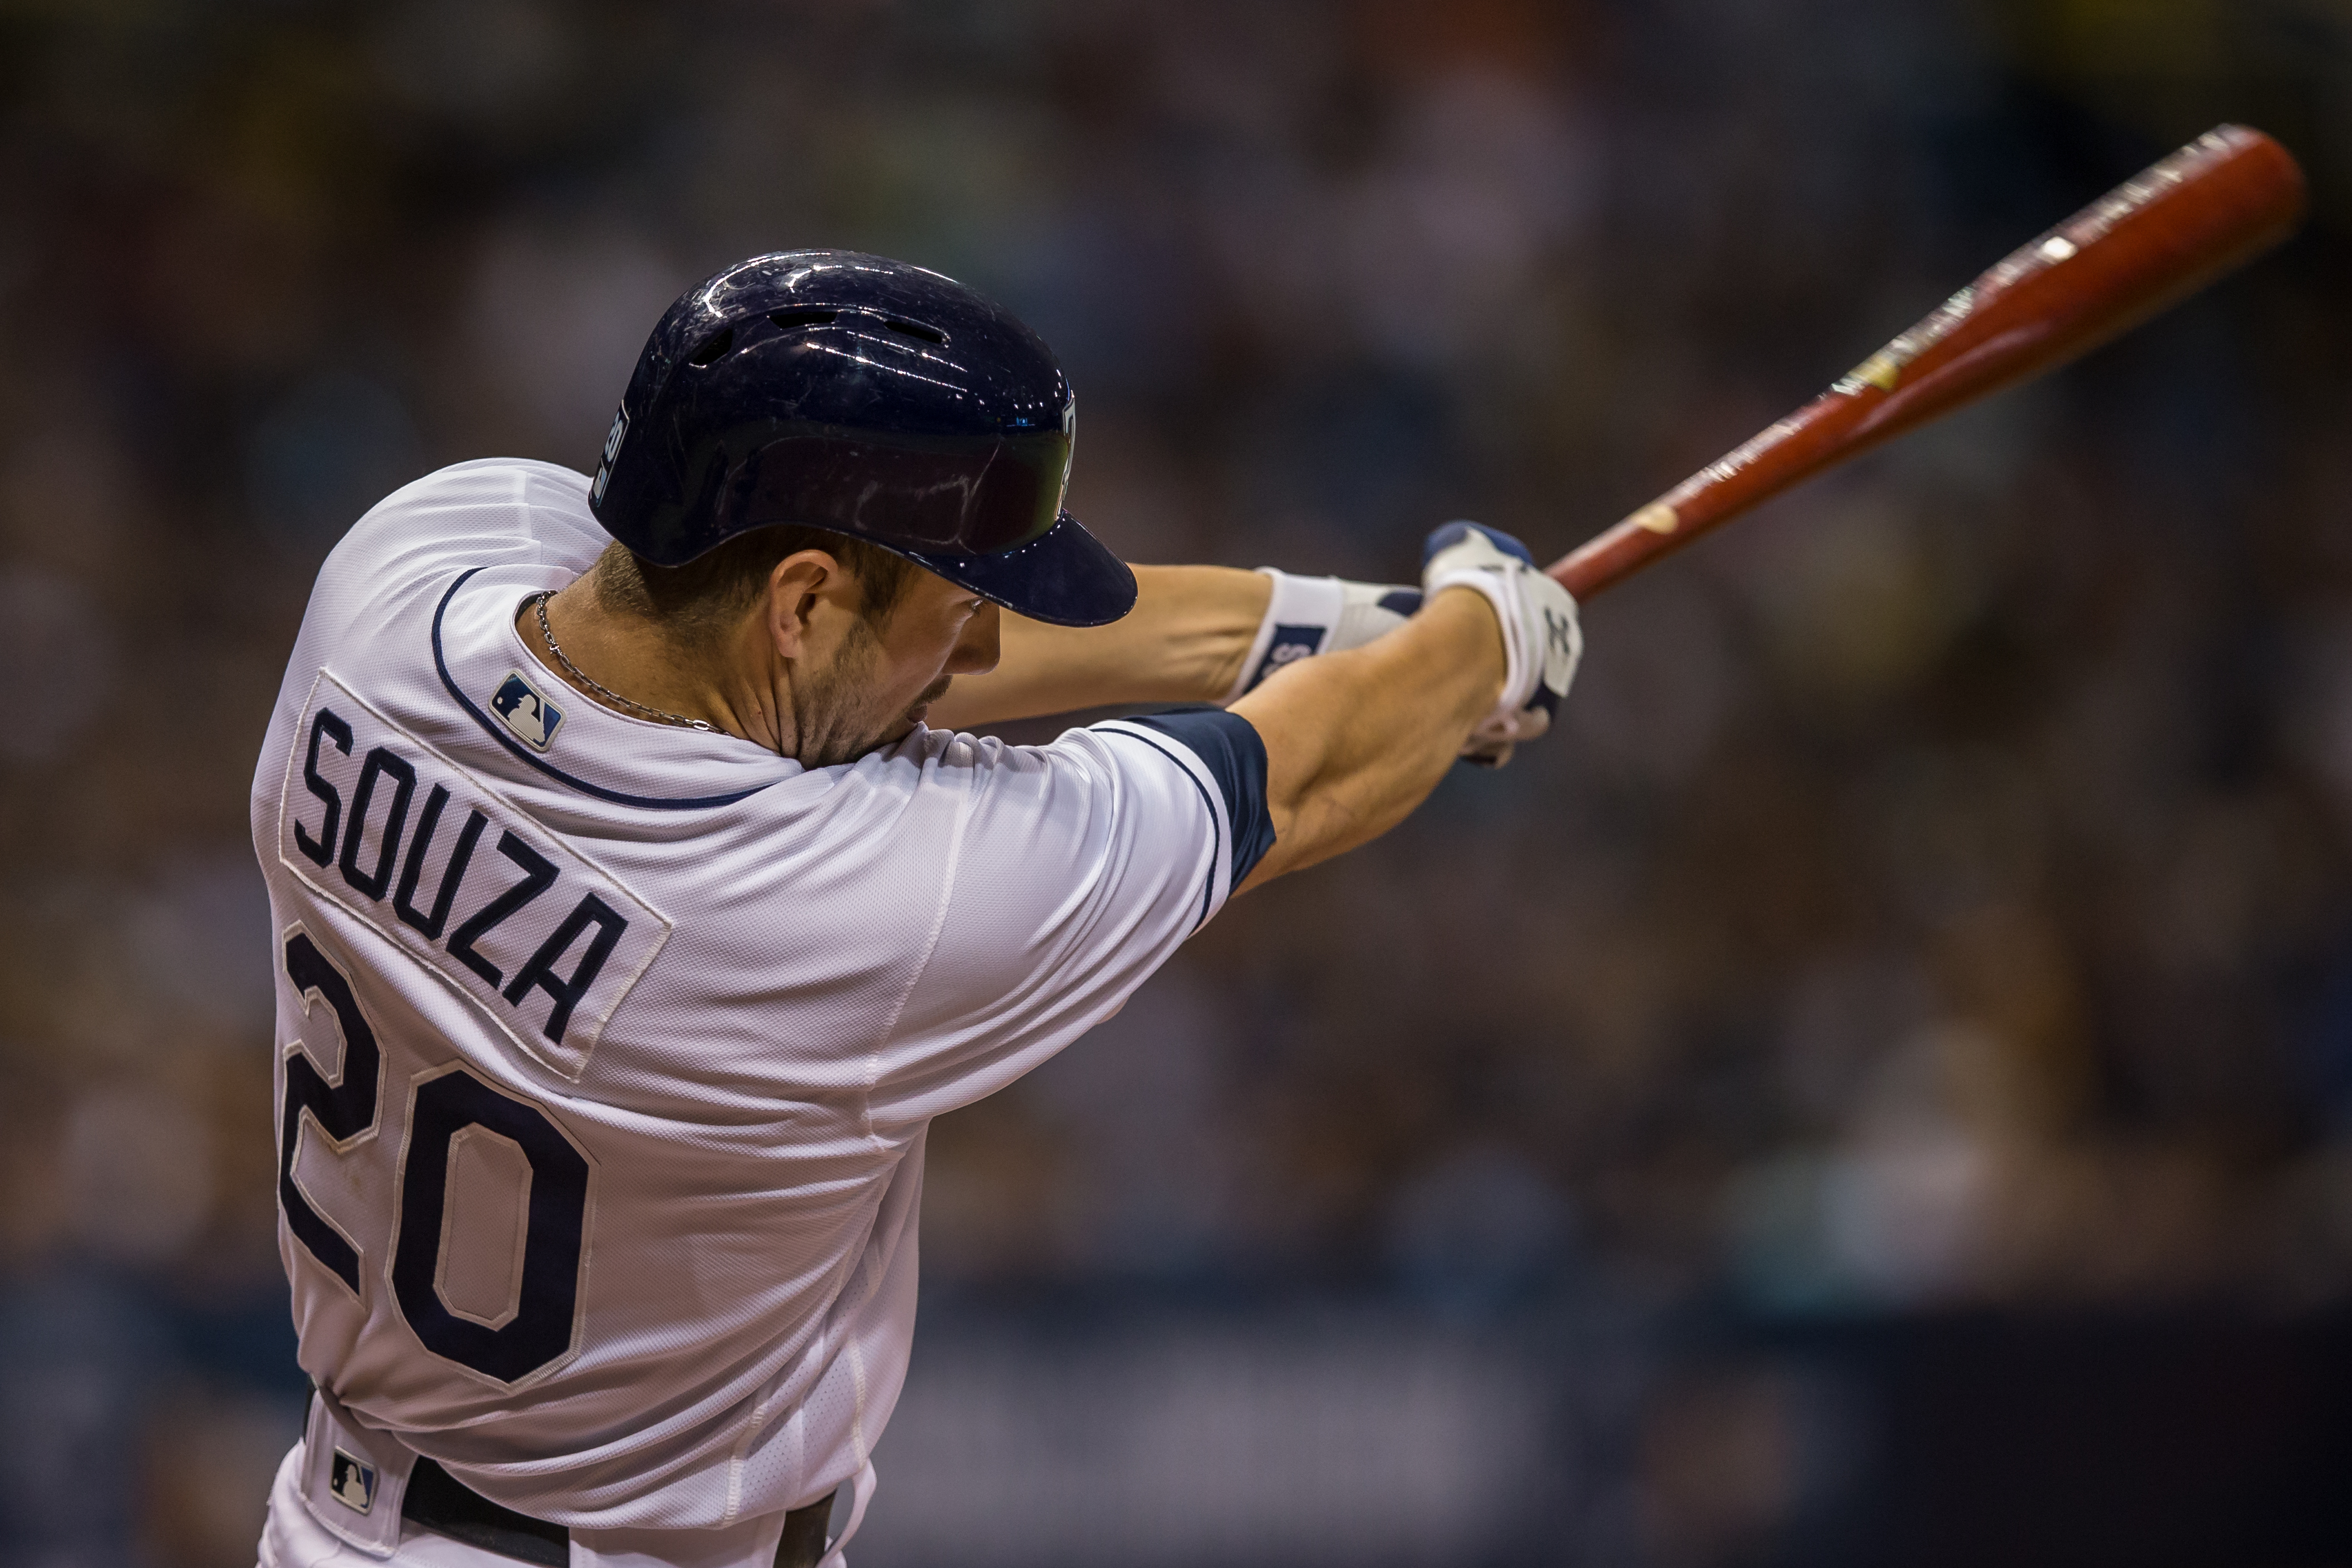 Souza drove in three runs to lead the Rays./JEFFREY S, KING